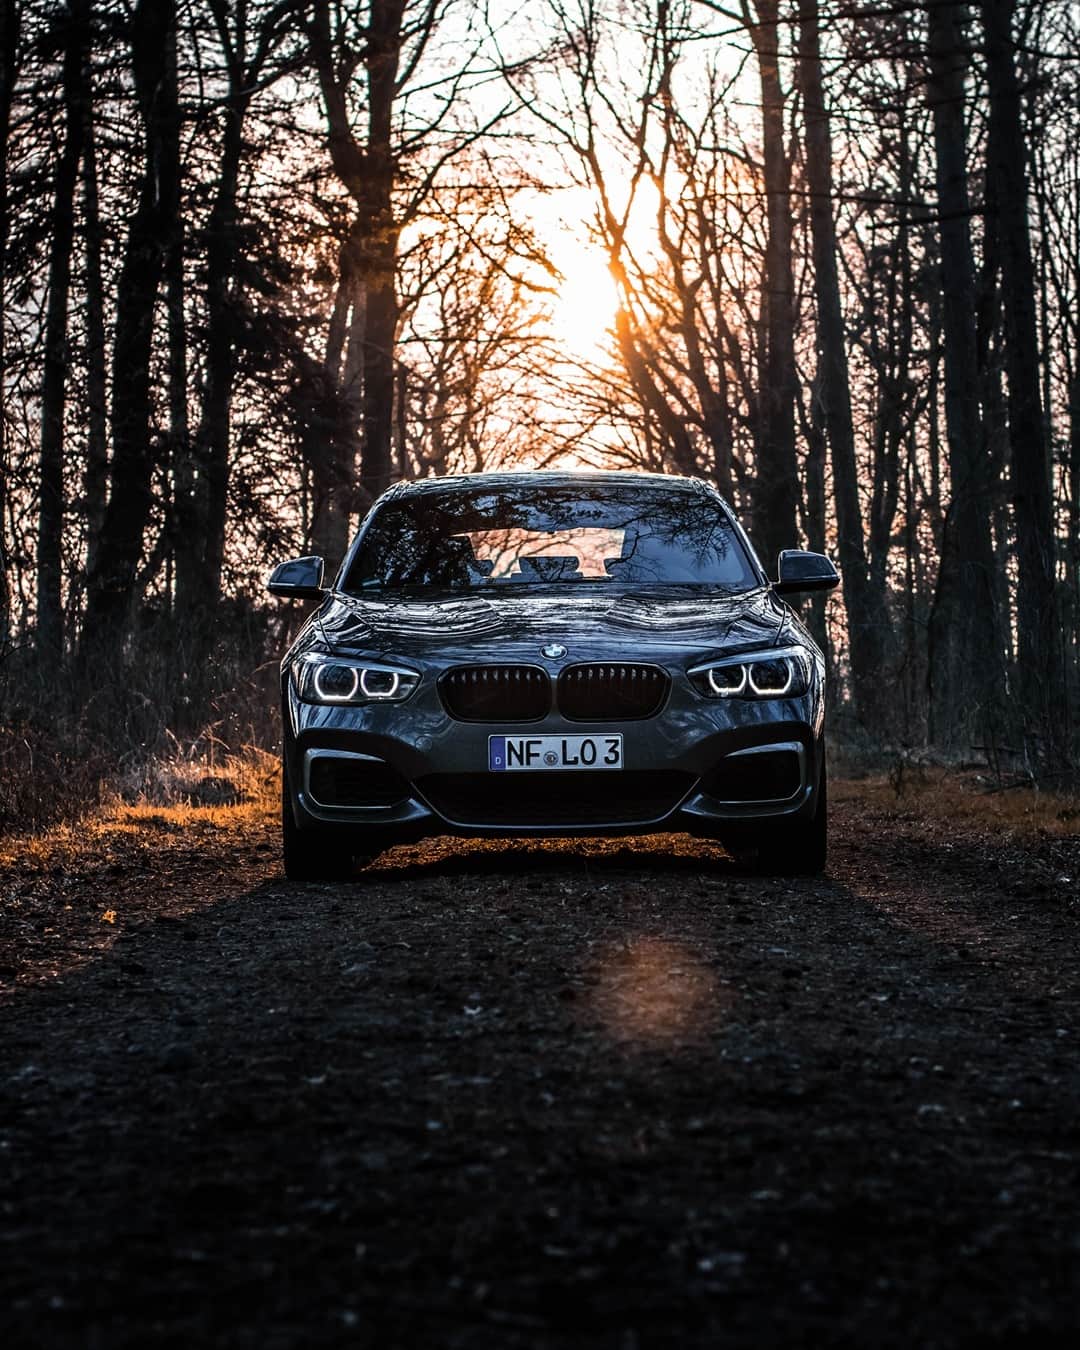 BMWのインスタグラム：「Looking for some peace and quiet? The second generation of the BMW 1 Series. #BMW #1Series #BMWrepost @michi.loo @sowa.jpg」